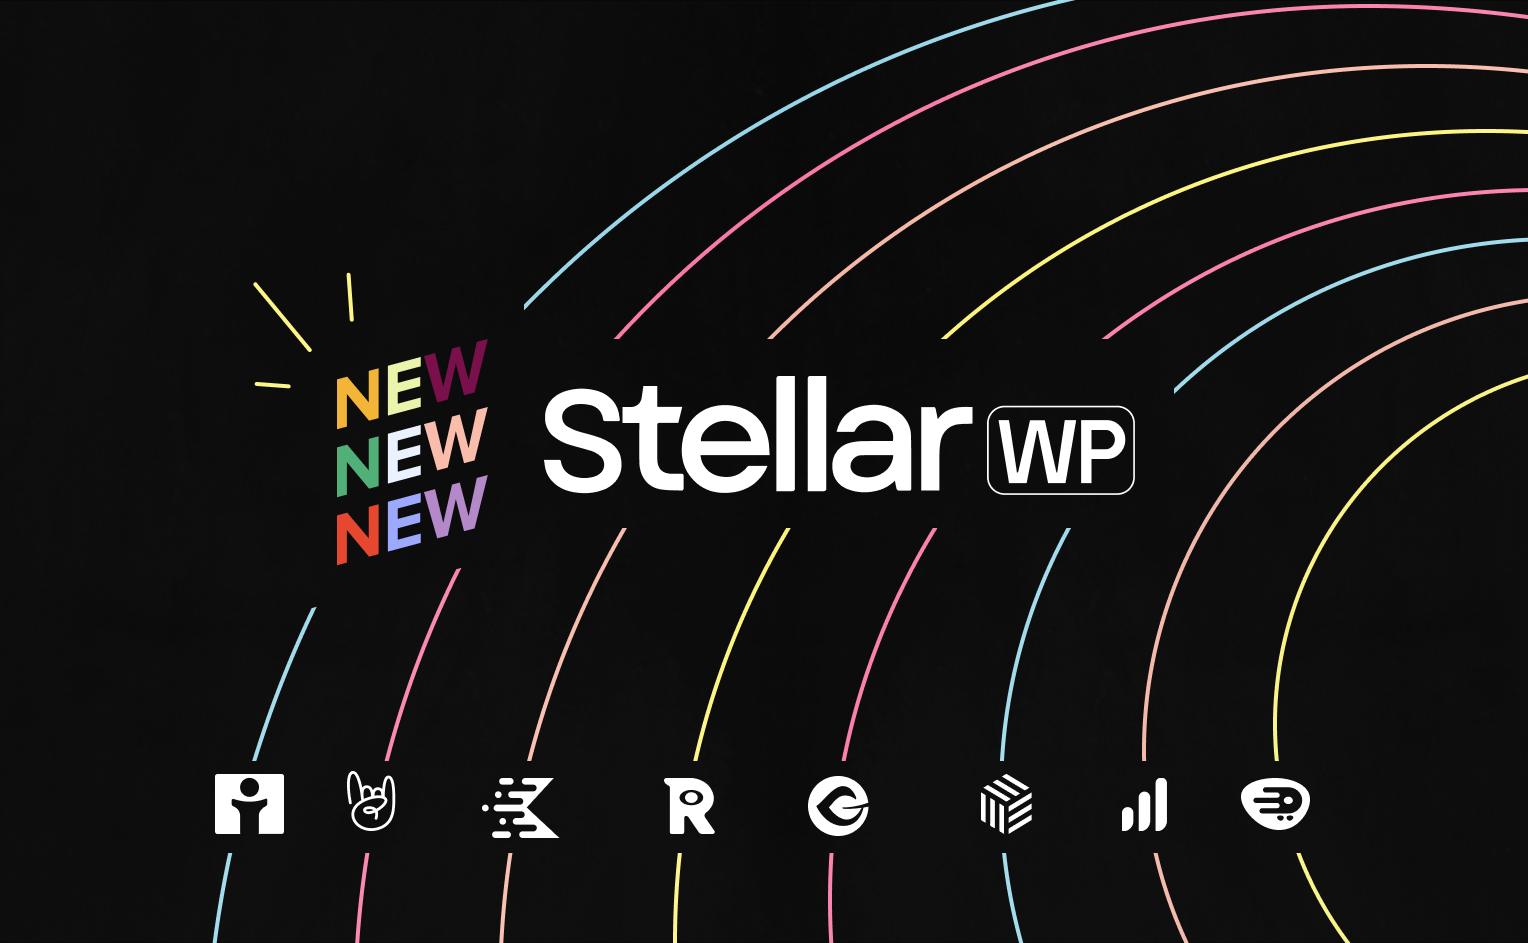 StellarWP logo, along with colorful design lines, star icon, and lightning icons as well as StellarWP brands logos underneath